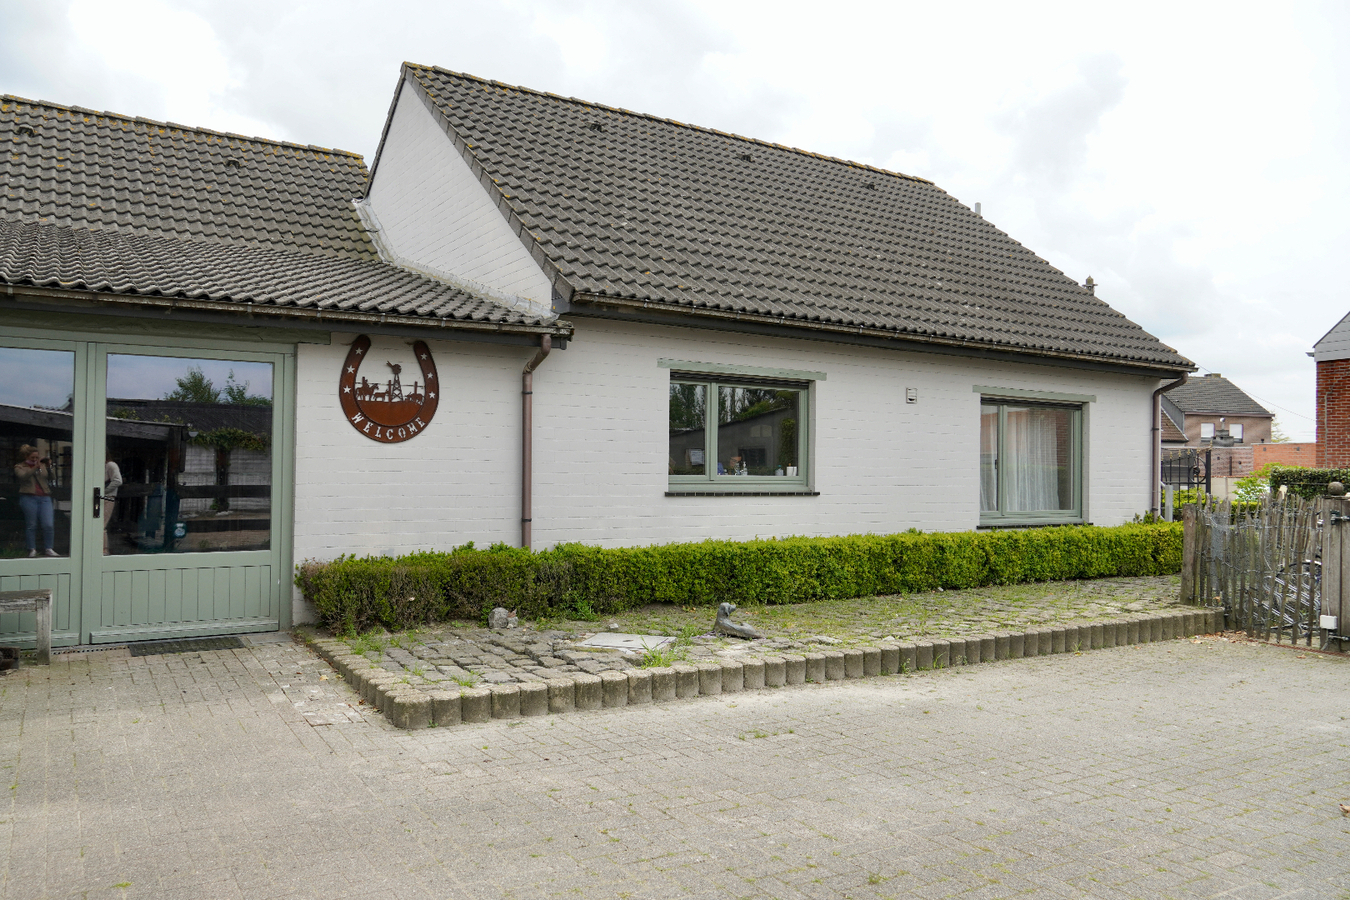 Property sold in Kalmthout